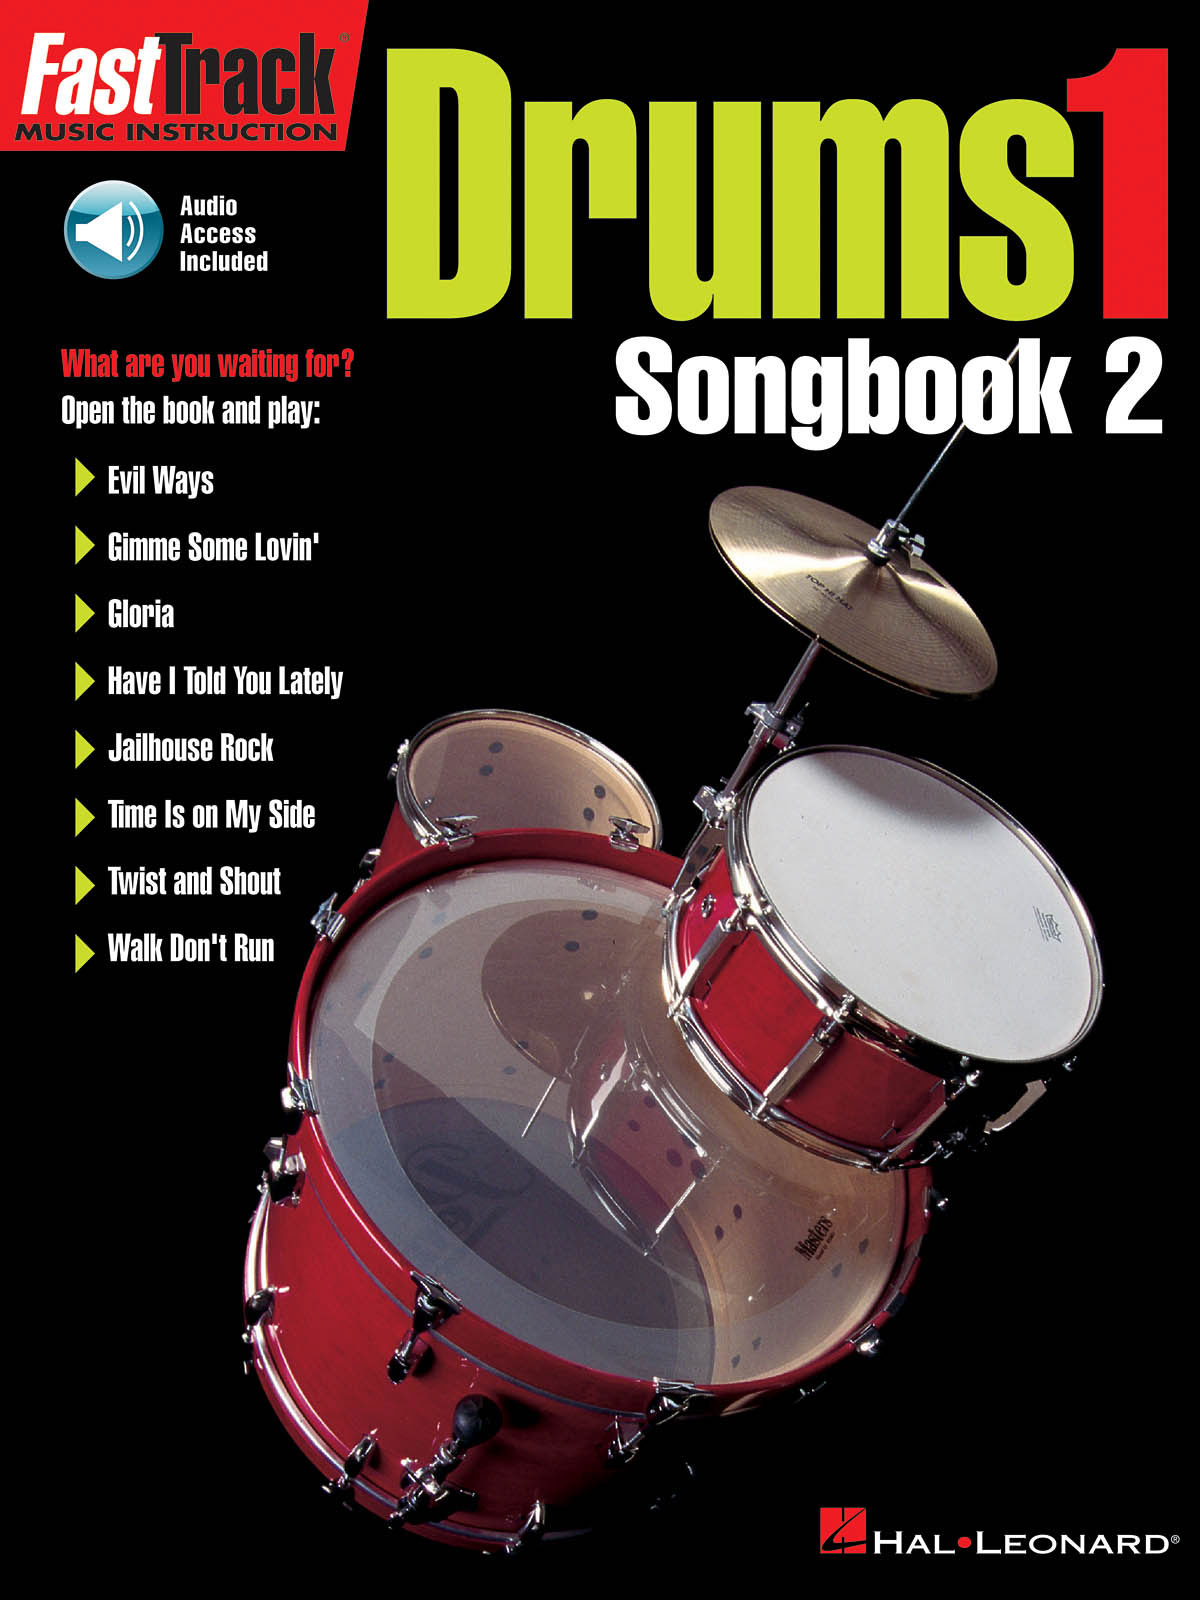 HAL LEONARD FAST TRACK DRUMS ONE SONGBOOK TWO + MP3 - DRUMS